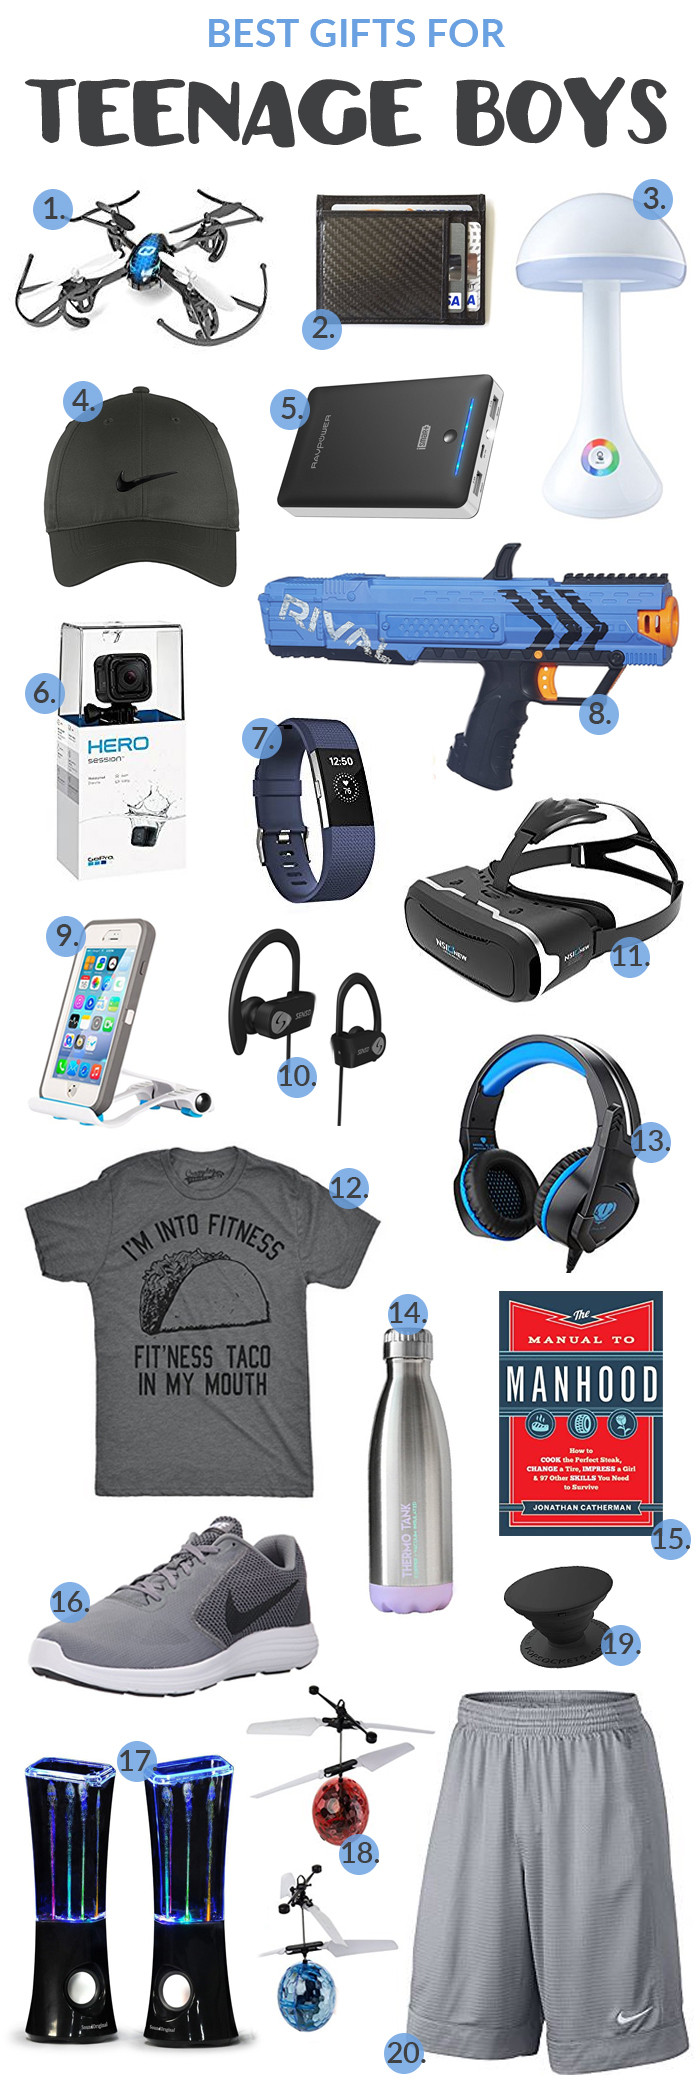 Top Gift Ideas For Boys
 Best Gifts for Teenage Boys — Our Kind of Crazy